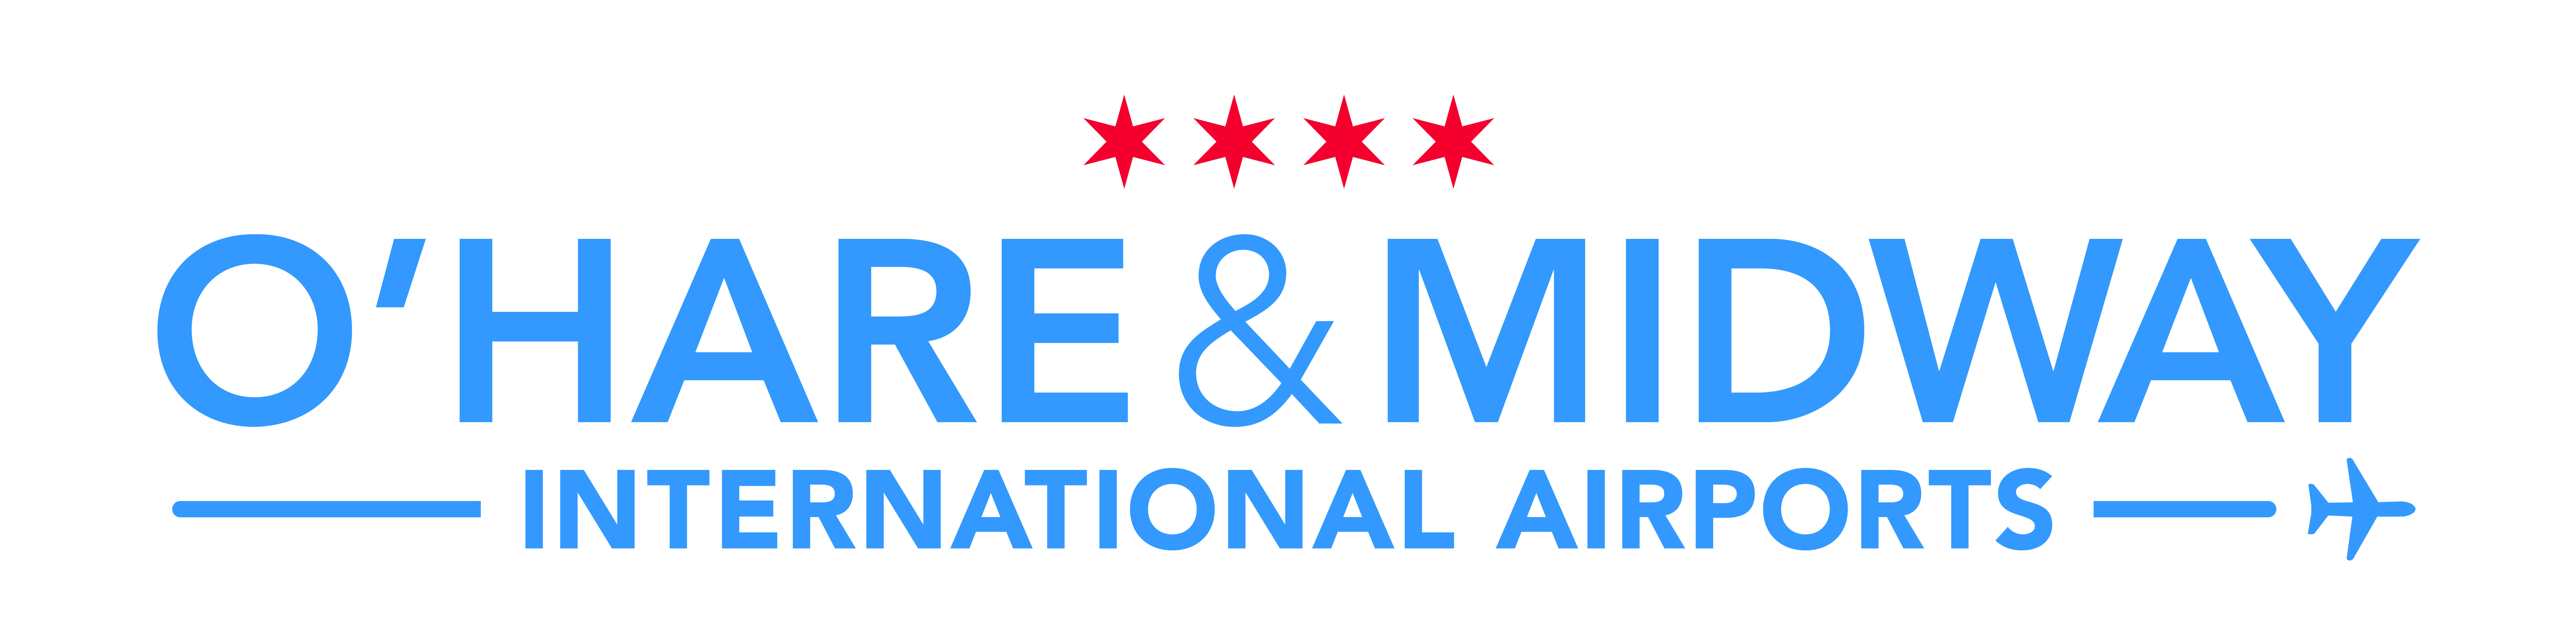 OHare & Midway International Airports